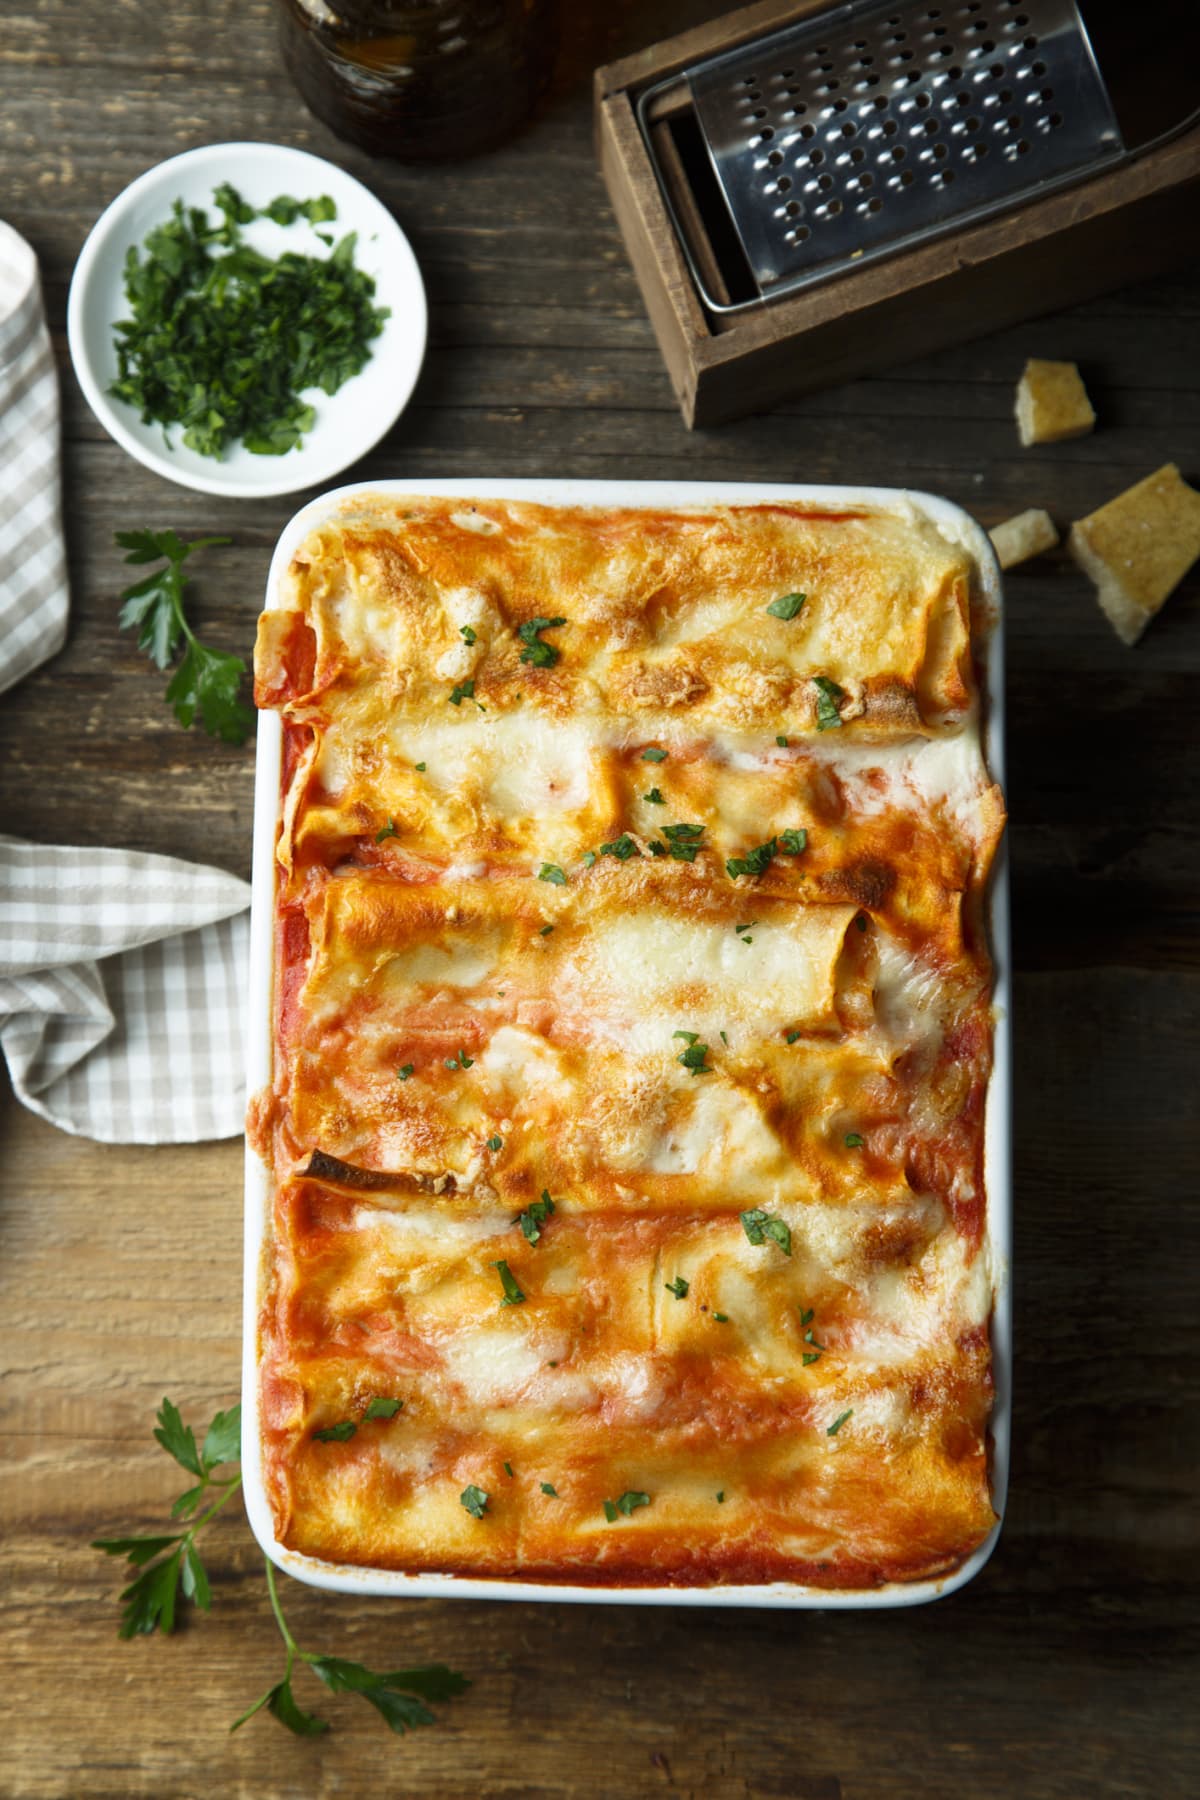 Baked lasagna in a white tray on a wooden table.